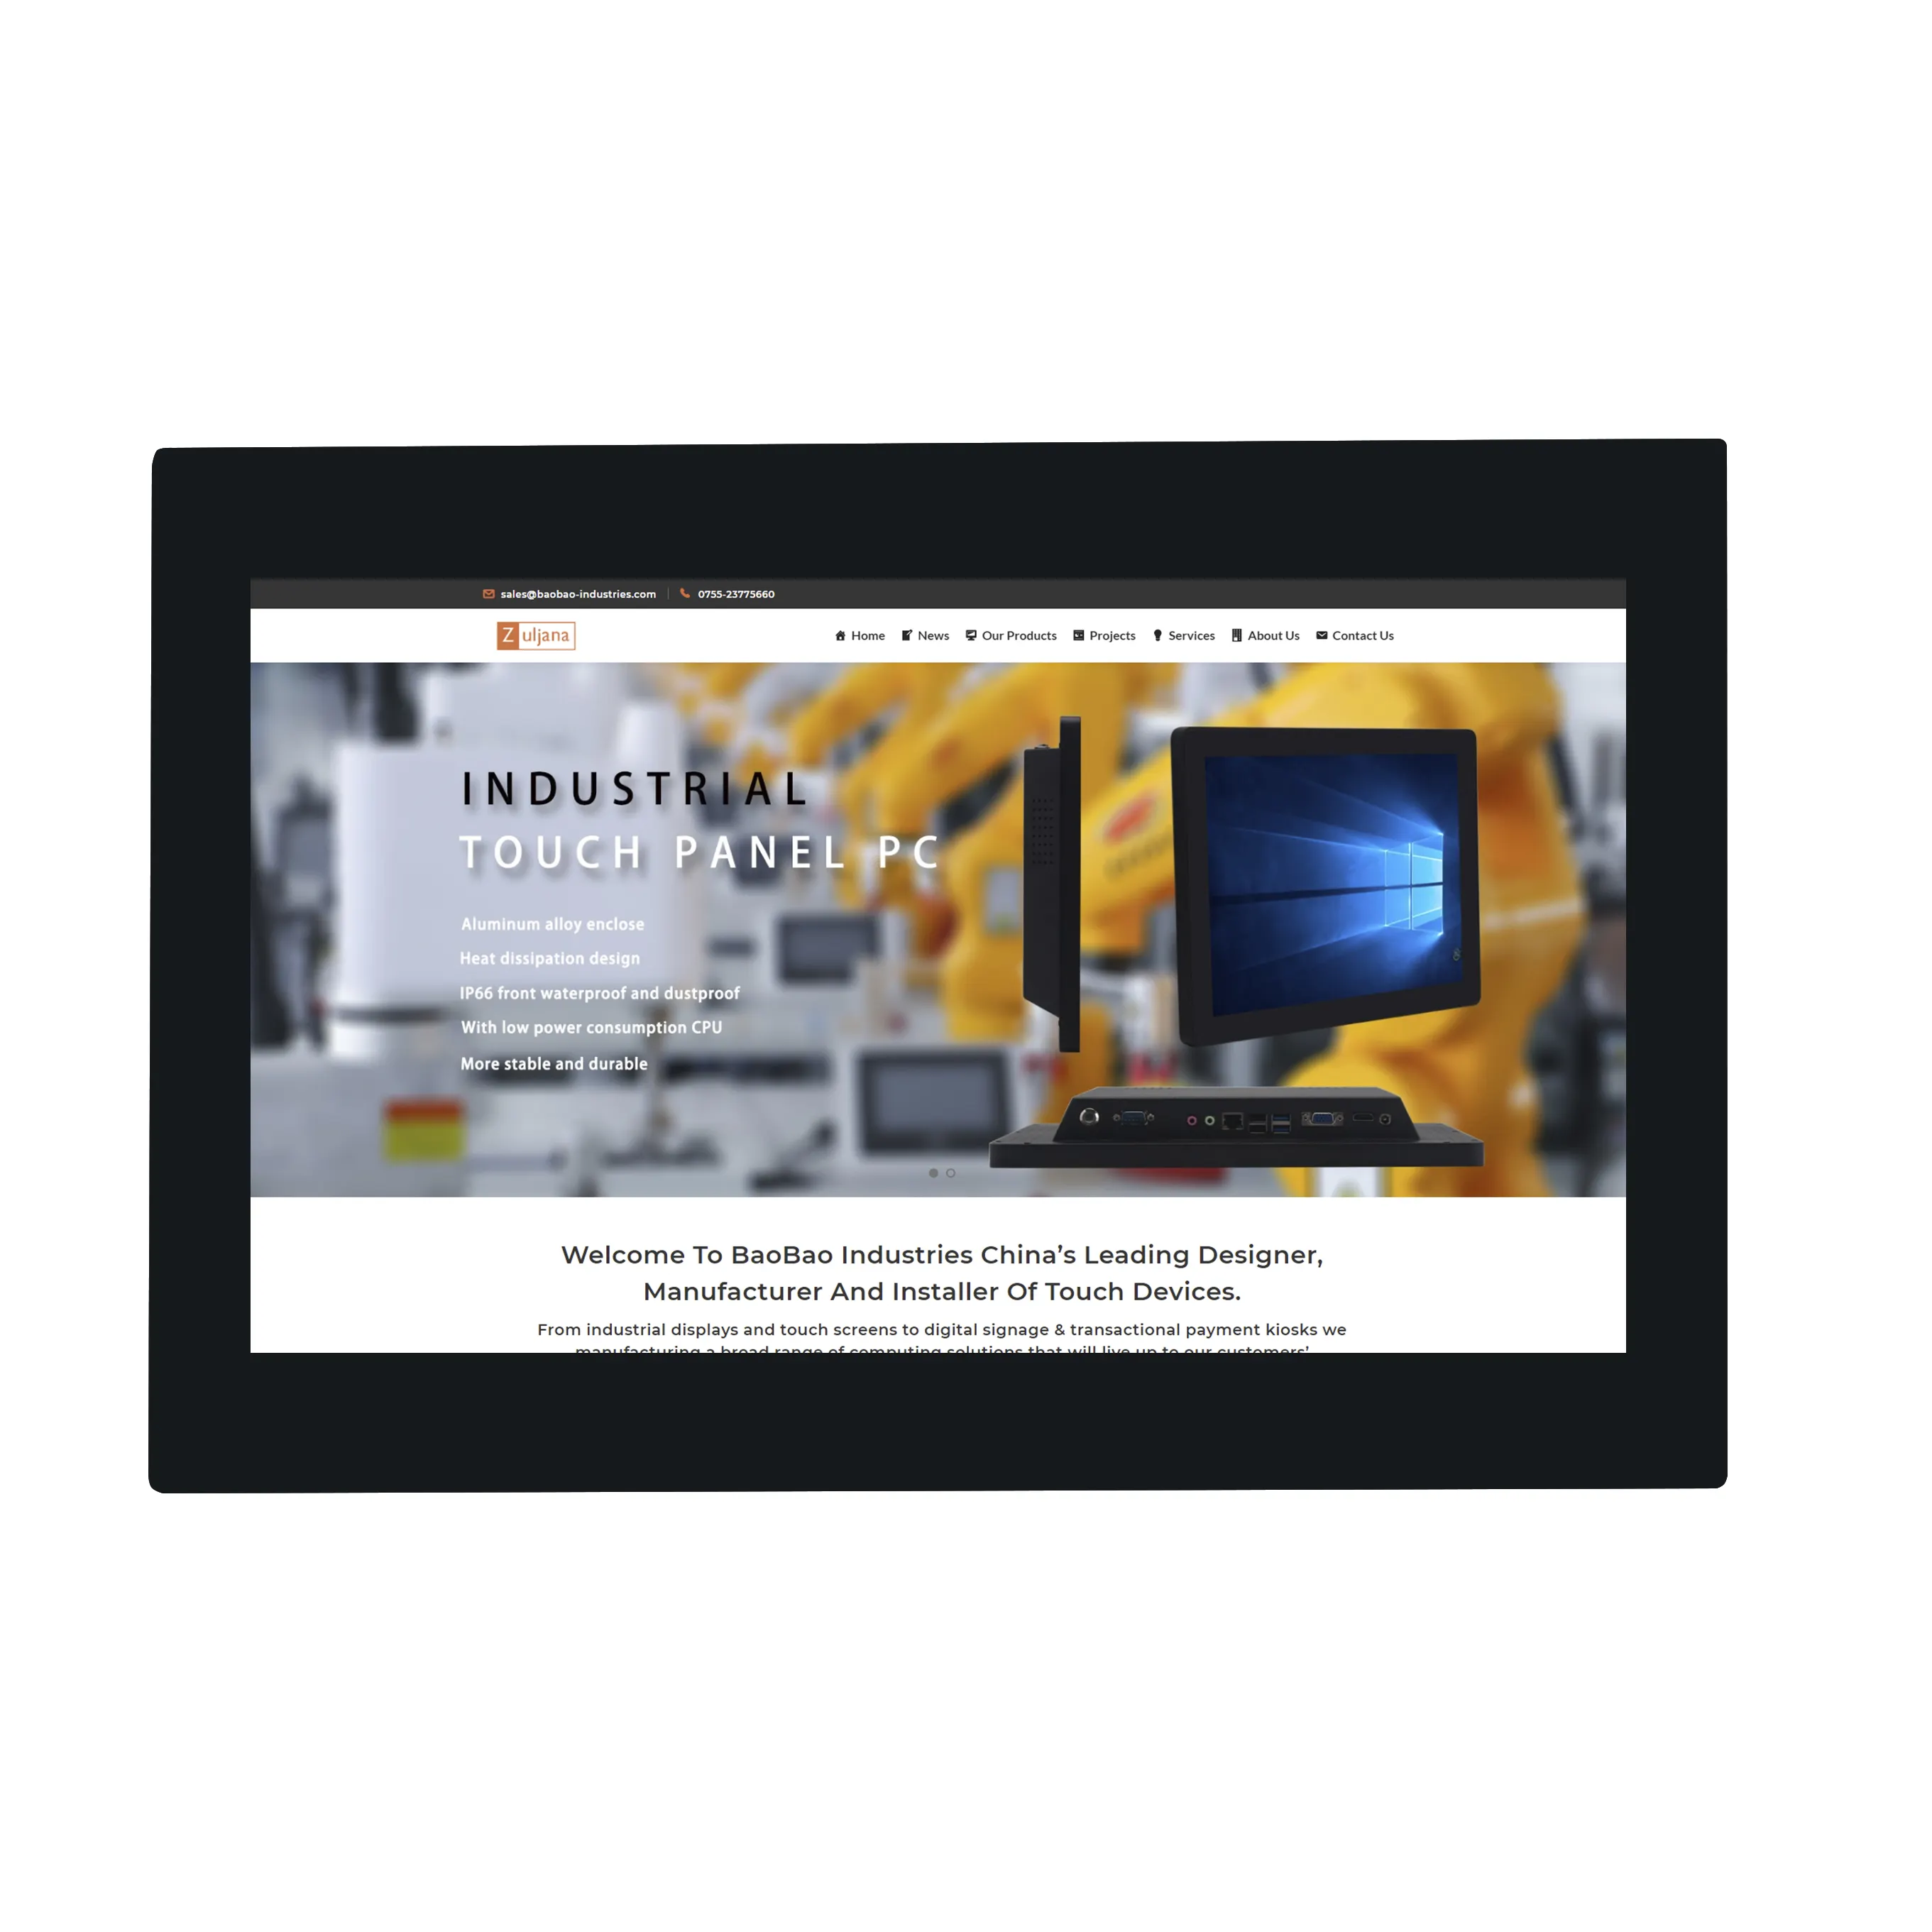 15.6 Inch Front Panel Display Integration And Bonding Technologies Touch Display Monitor